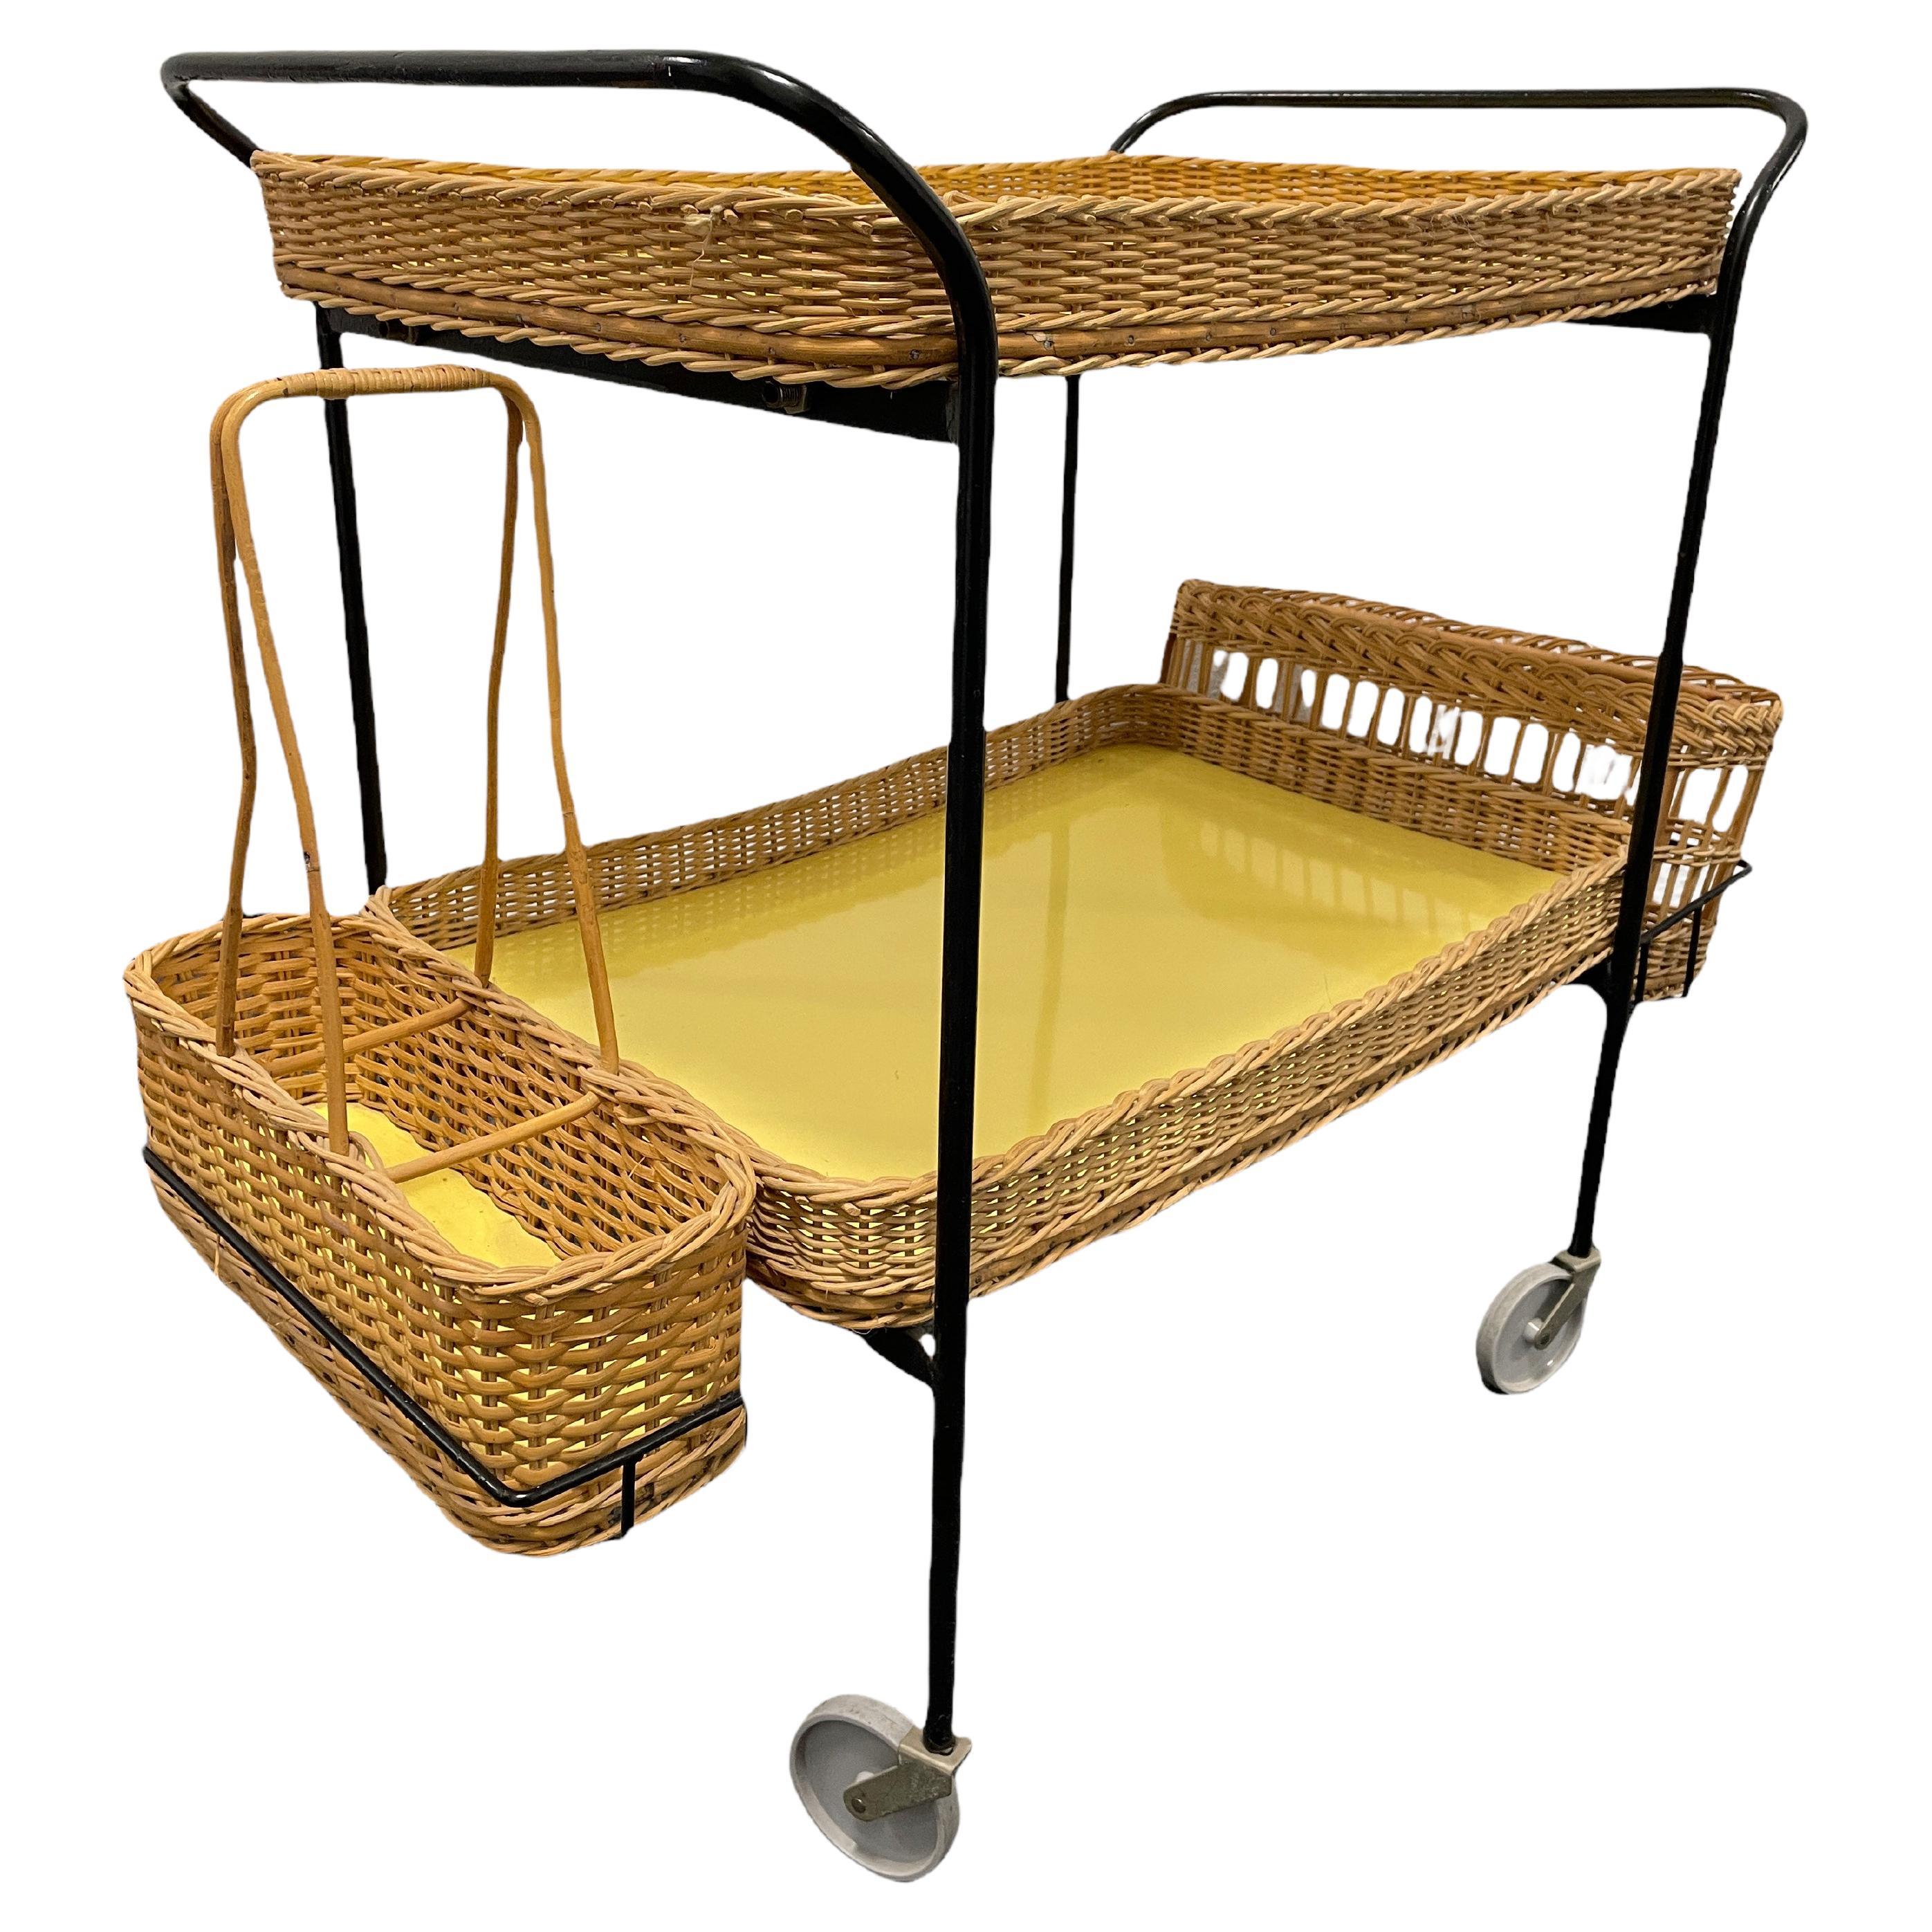 Wicker and Iron Bar Cart or Tea Trolley Table, German, 1950s